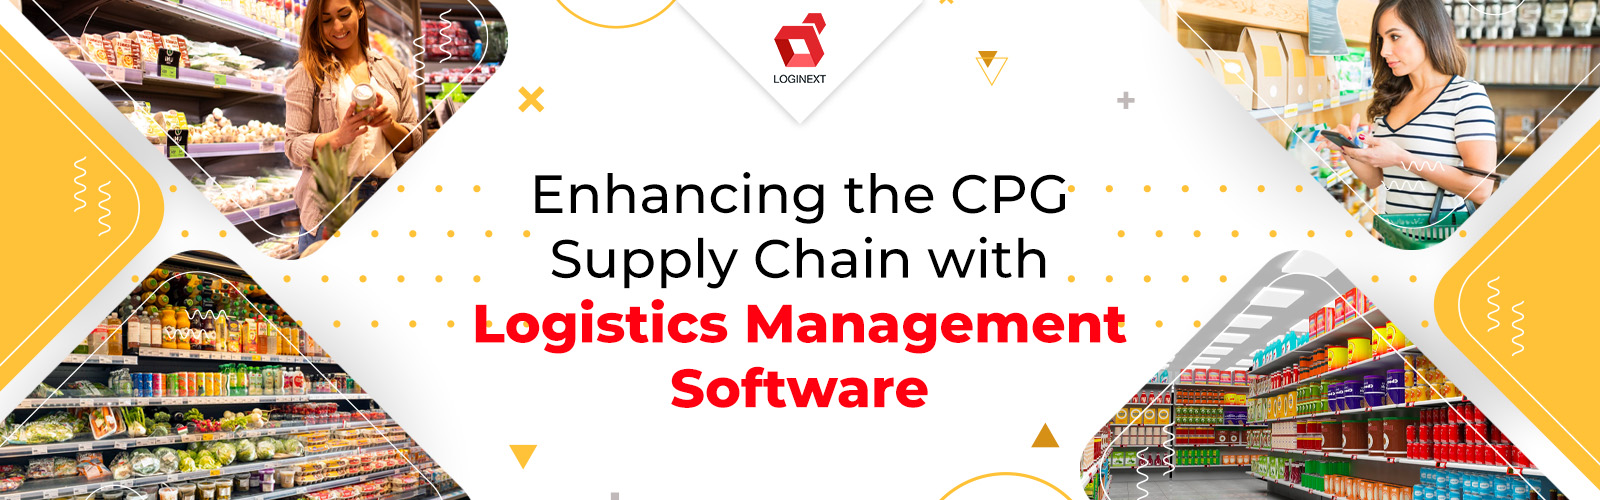 Enhancing CPG Supply Chain with Logistics Management Software- Whitepaper